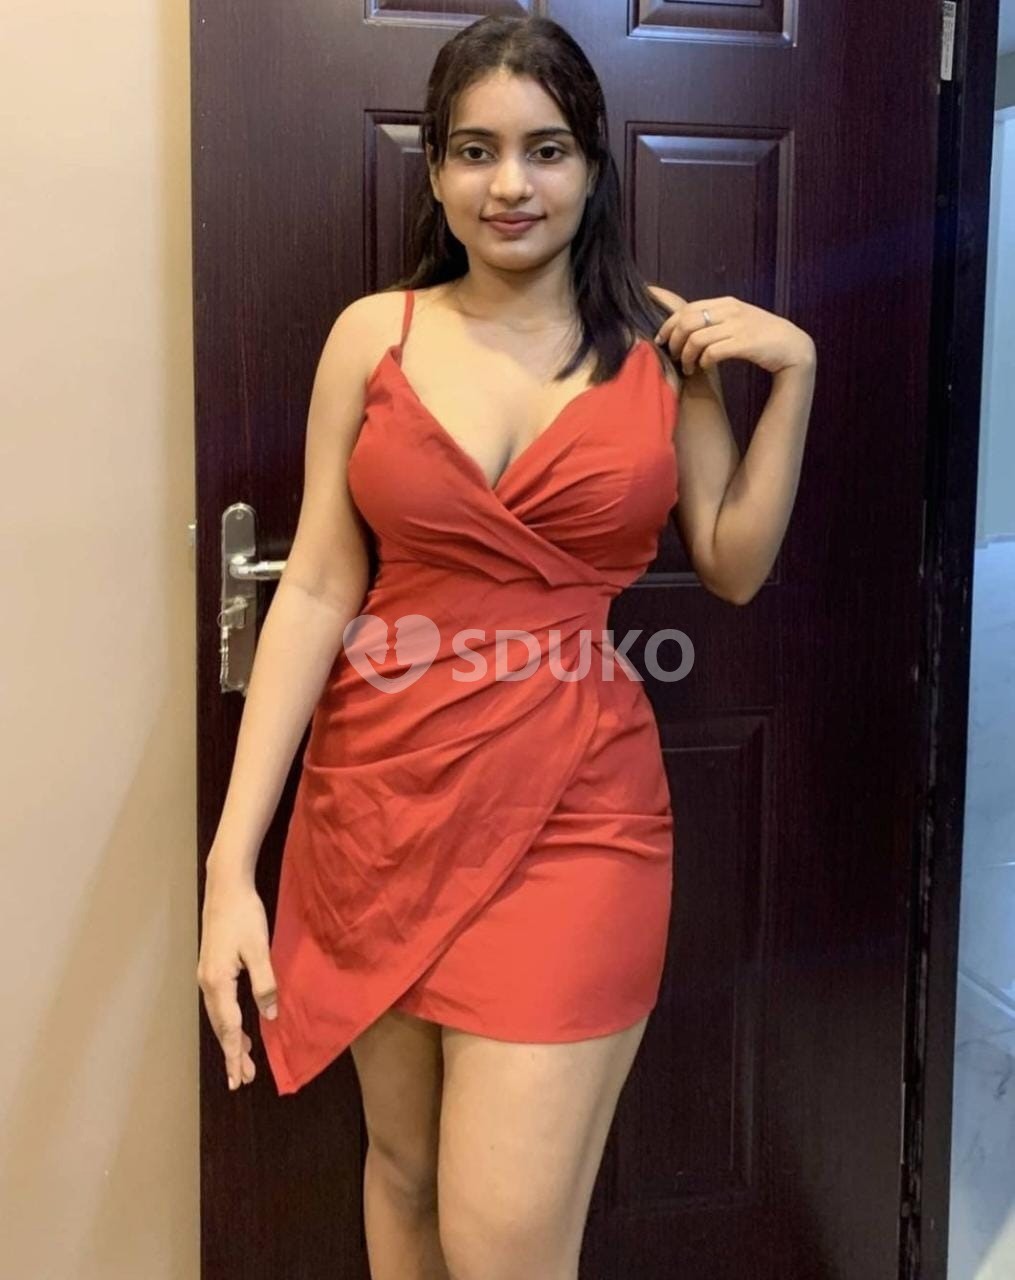 BTM LAYOUT (BANG....)✅ Myself Shruti independent college call girl and hot busty available service gt Hi there